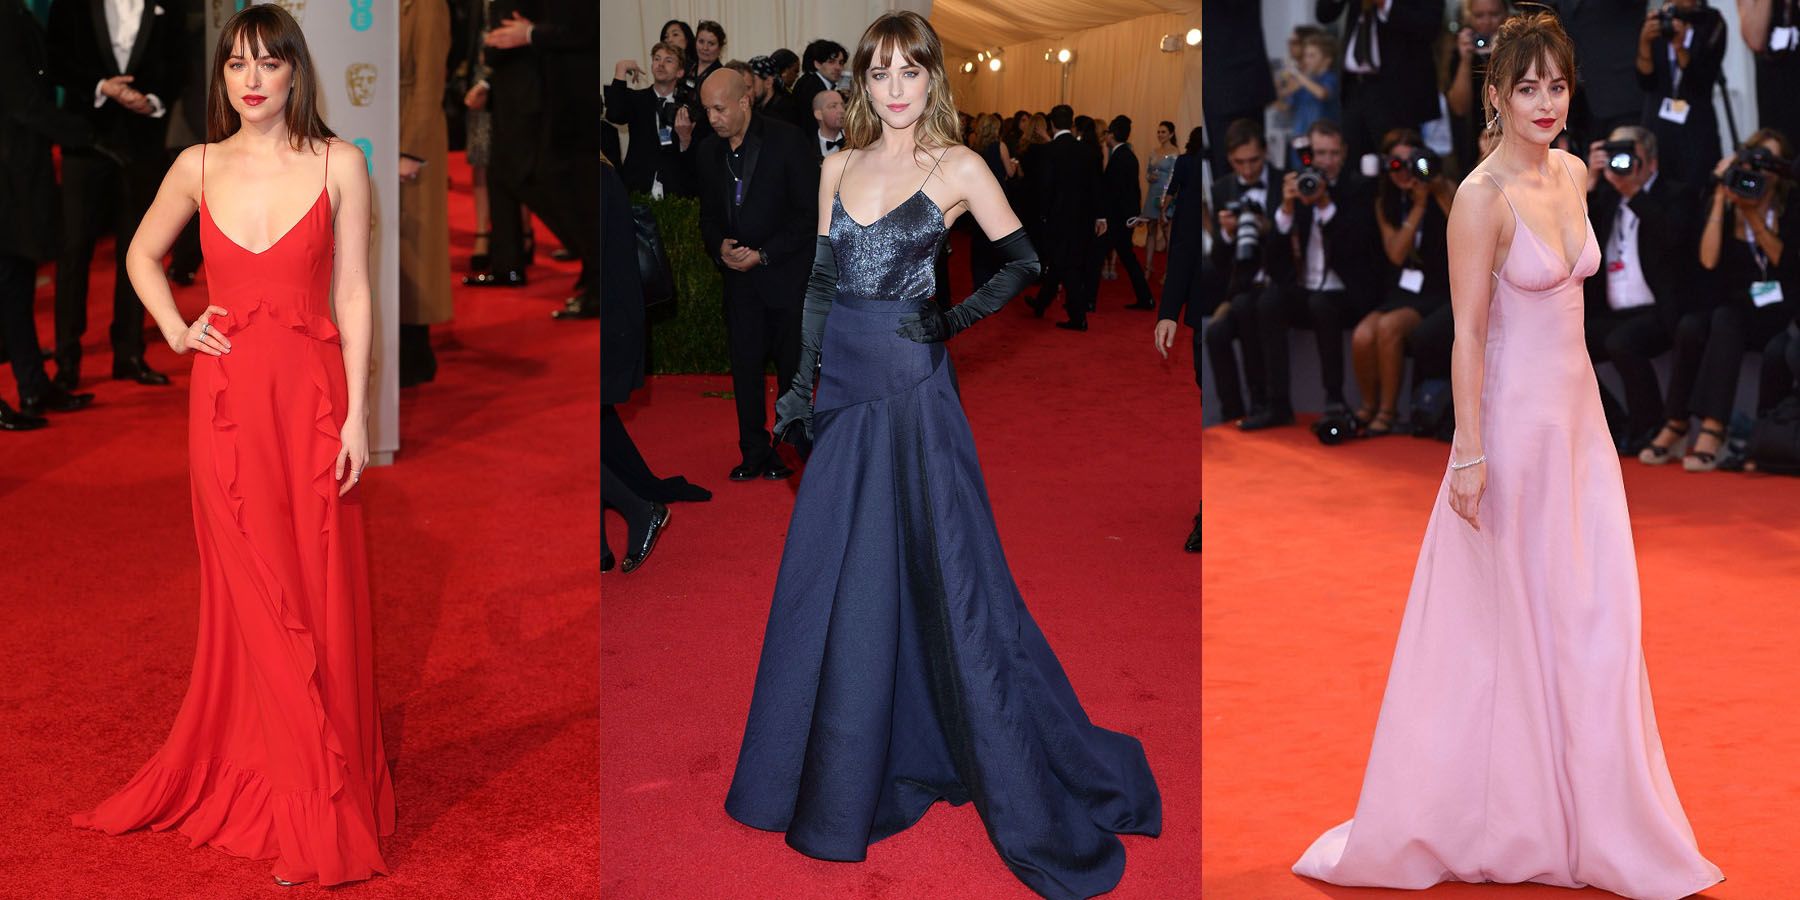 Inspirational!  Here's Dakota Johnson's Red Carpet Style, Casual, & Dating Time